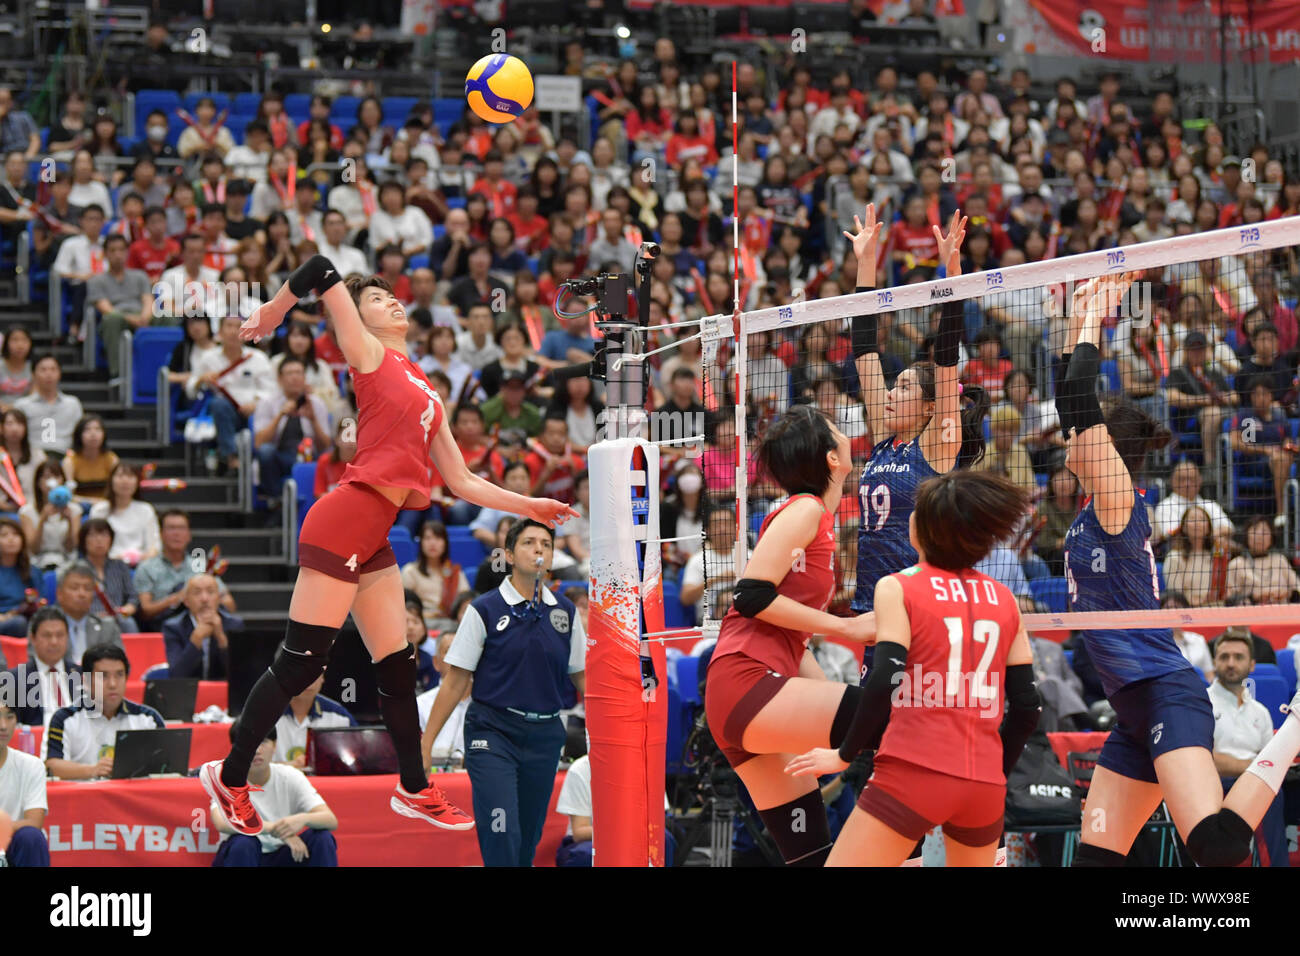 Yokohama, Japan. 16th Sep, 2019. Risa Shinnabe (1st L) of Japan spikes the ball during the Round Robin match between Japan and South Korea at the 2019 FIVB Women's World Cup in Yokohama, Japan, Sept. 16, 2019. Credit: Zhu Wei/Xinhua/Alamy Live News Stock Photo